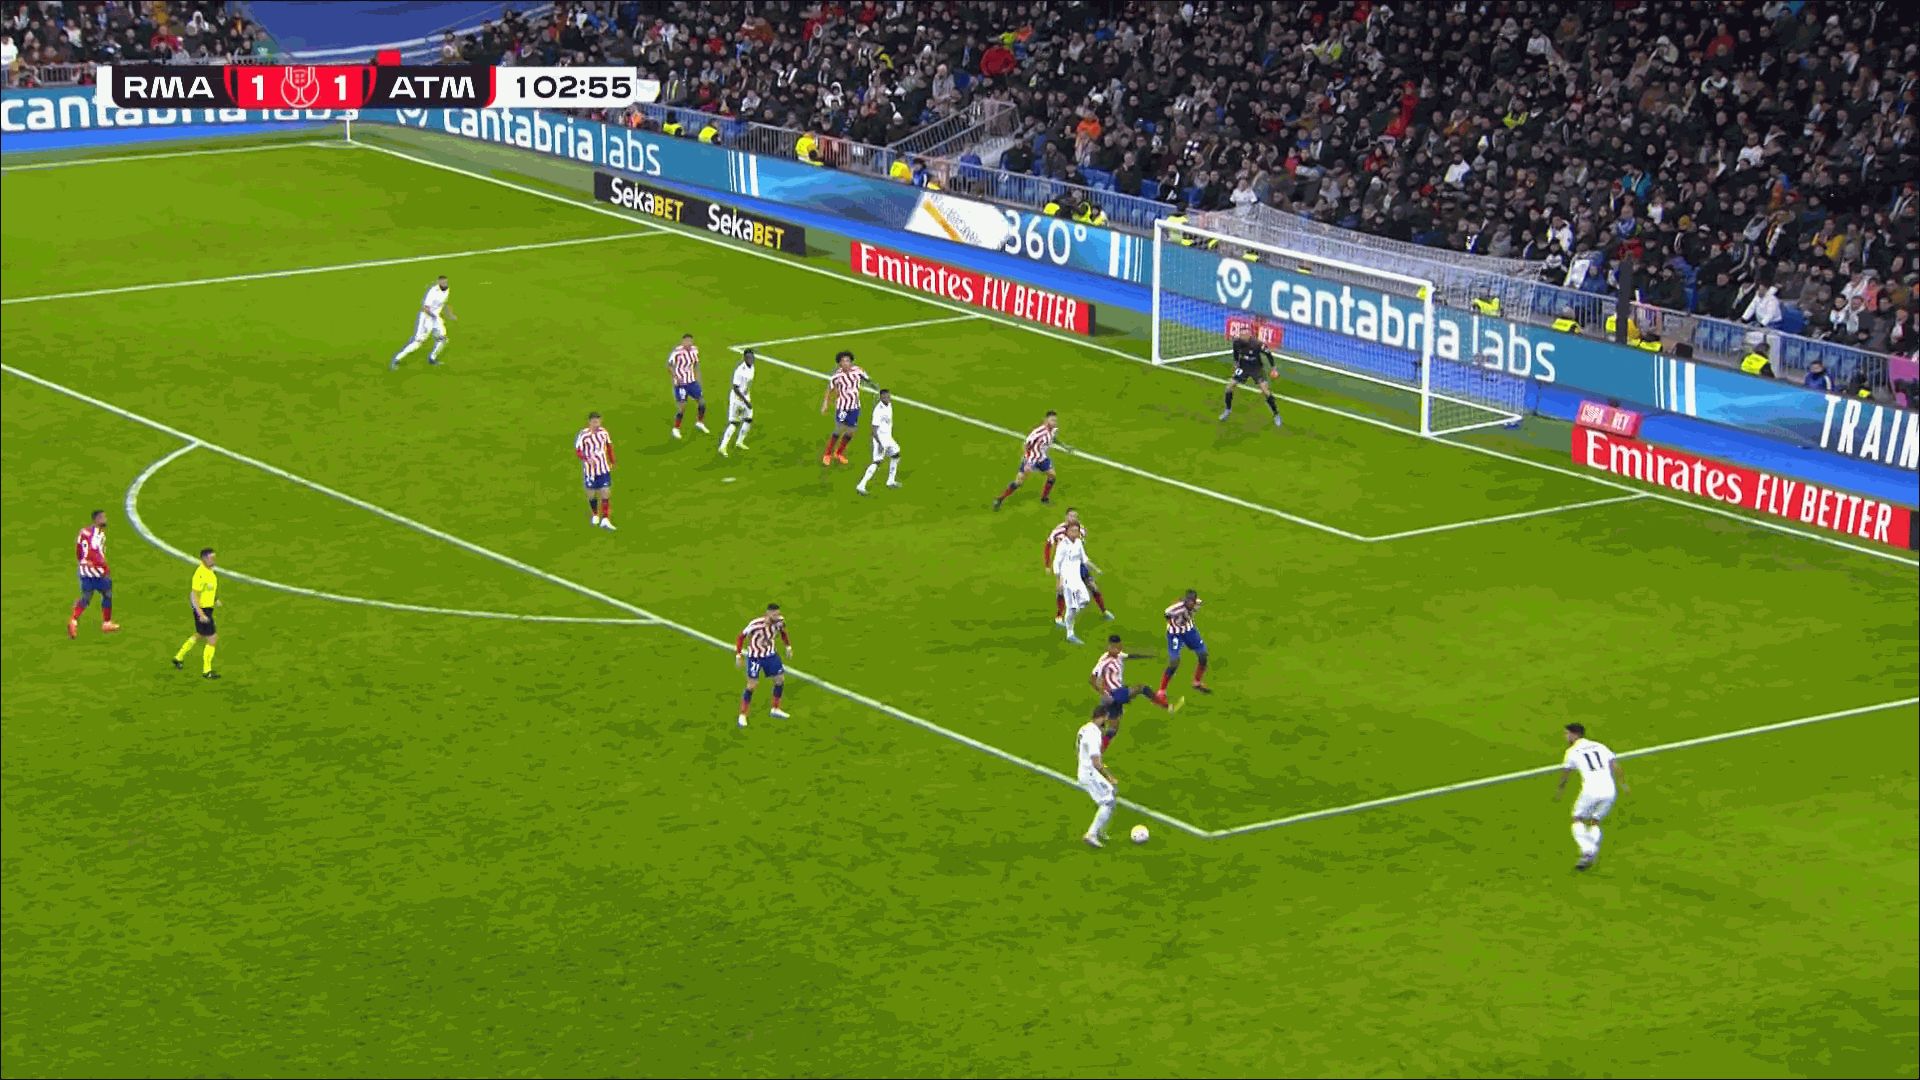 WATCH: Real Madrid lead in extra time against ten man Atletico Madrid